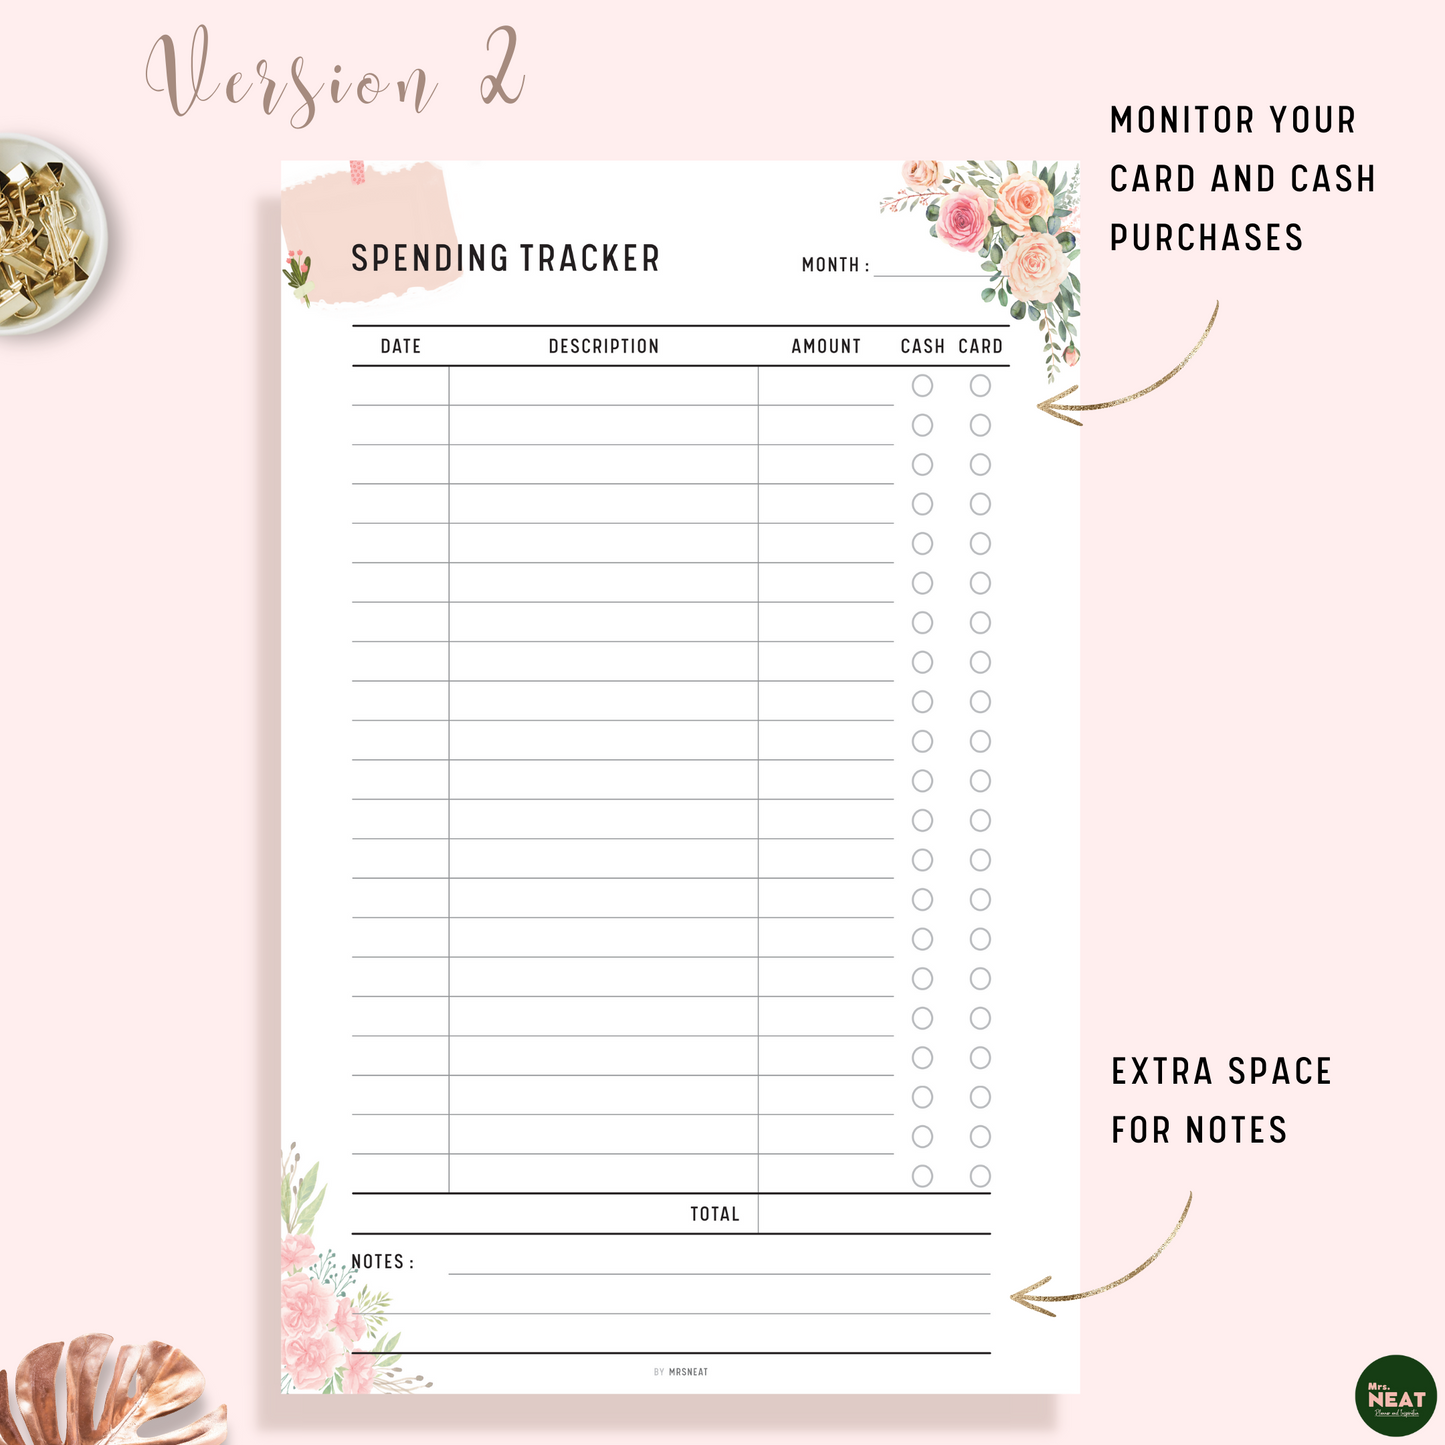 Floral Spending Tracker Planner with room for date, description, amount, 2 payment options and notes